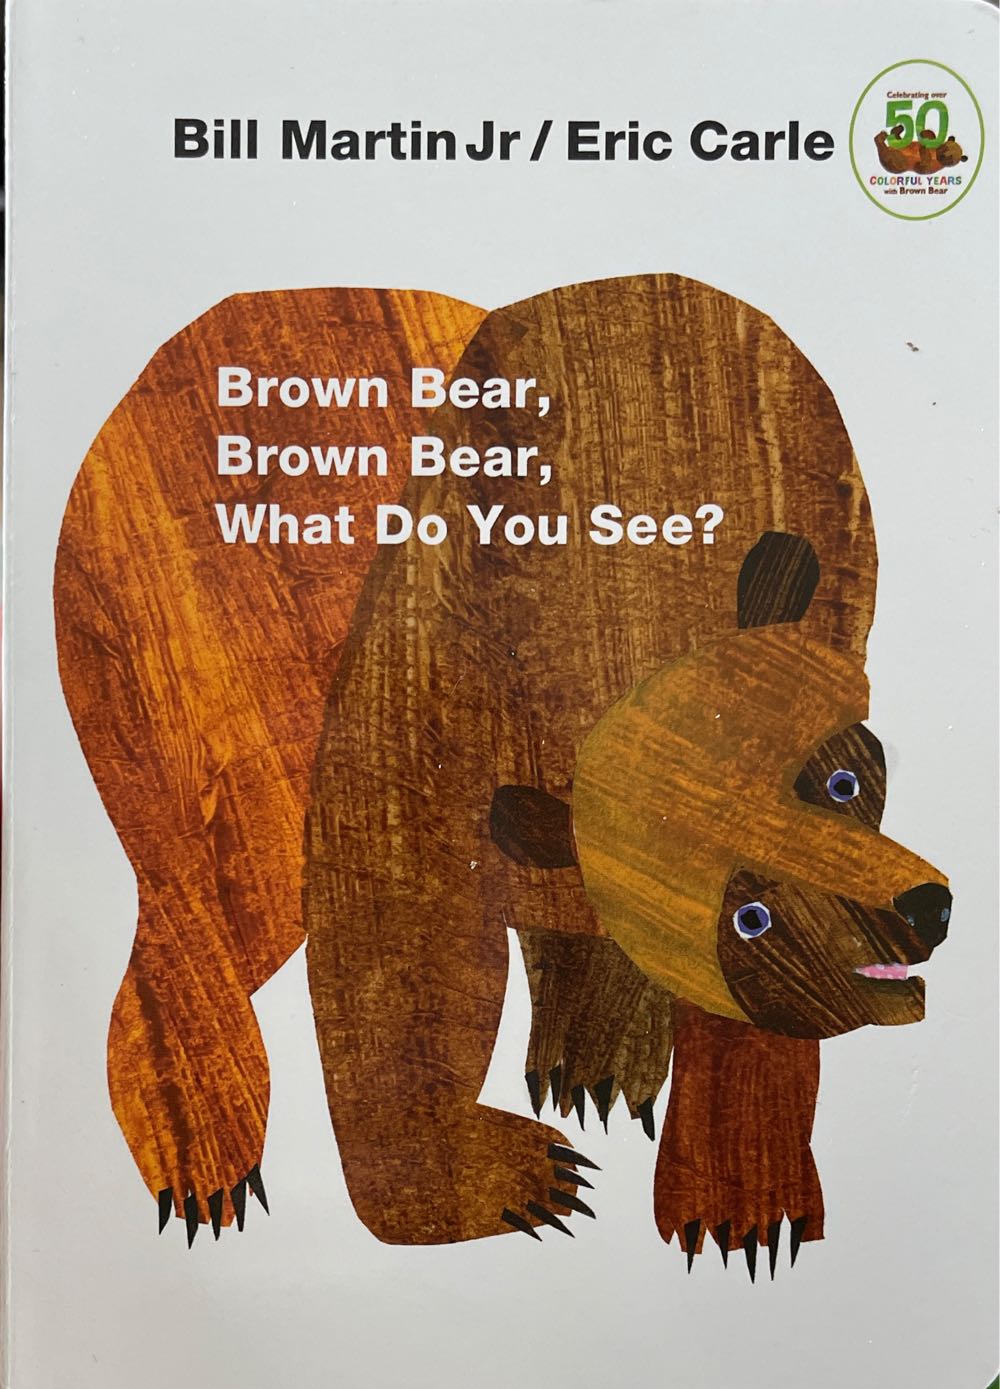 Brown Bear, Brown Bear, What Do You See? - Eric Carle (Henry Holt and Co. (BYR) - Board Book) book collectible [Barcode 9780805047905] - Main Image 3